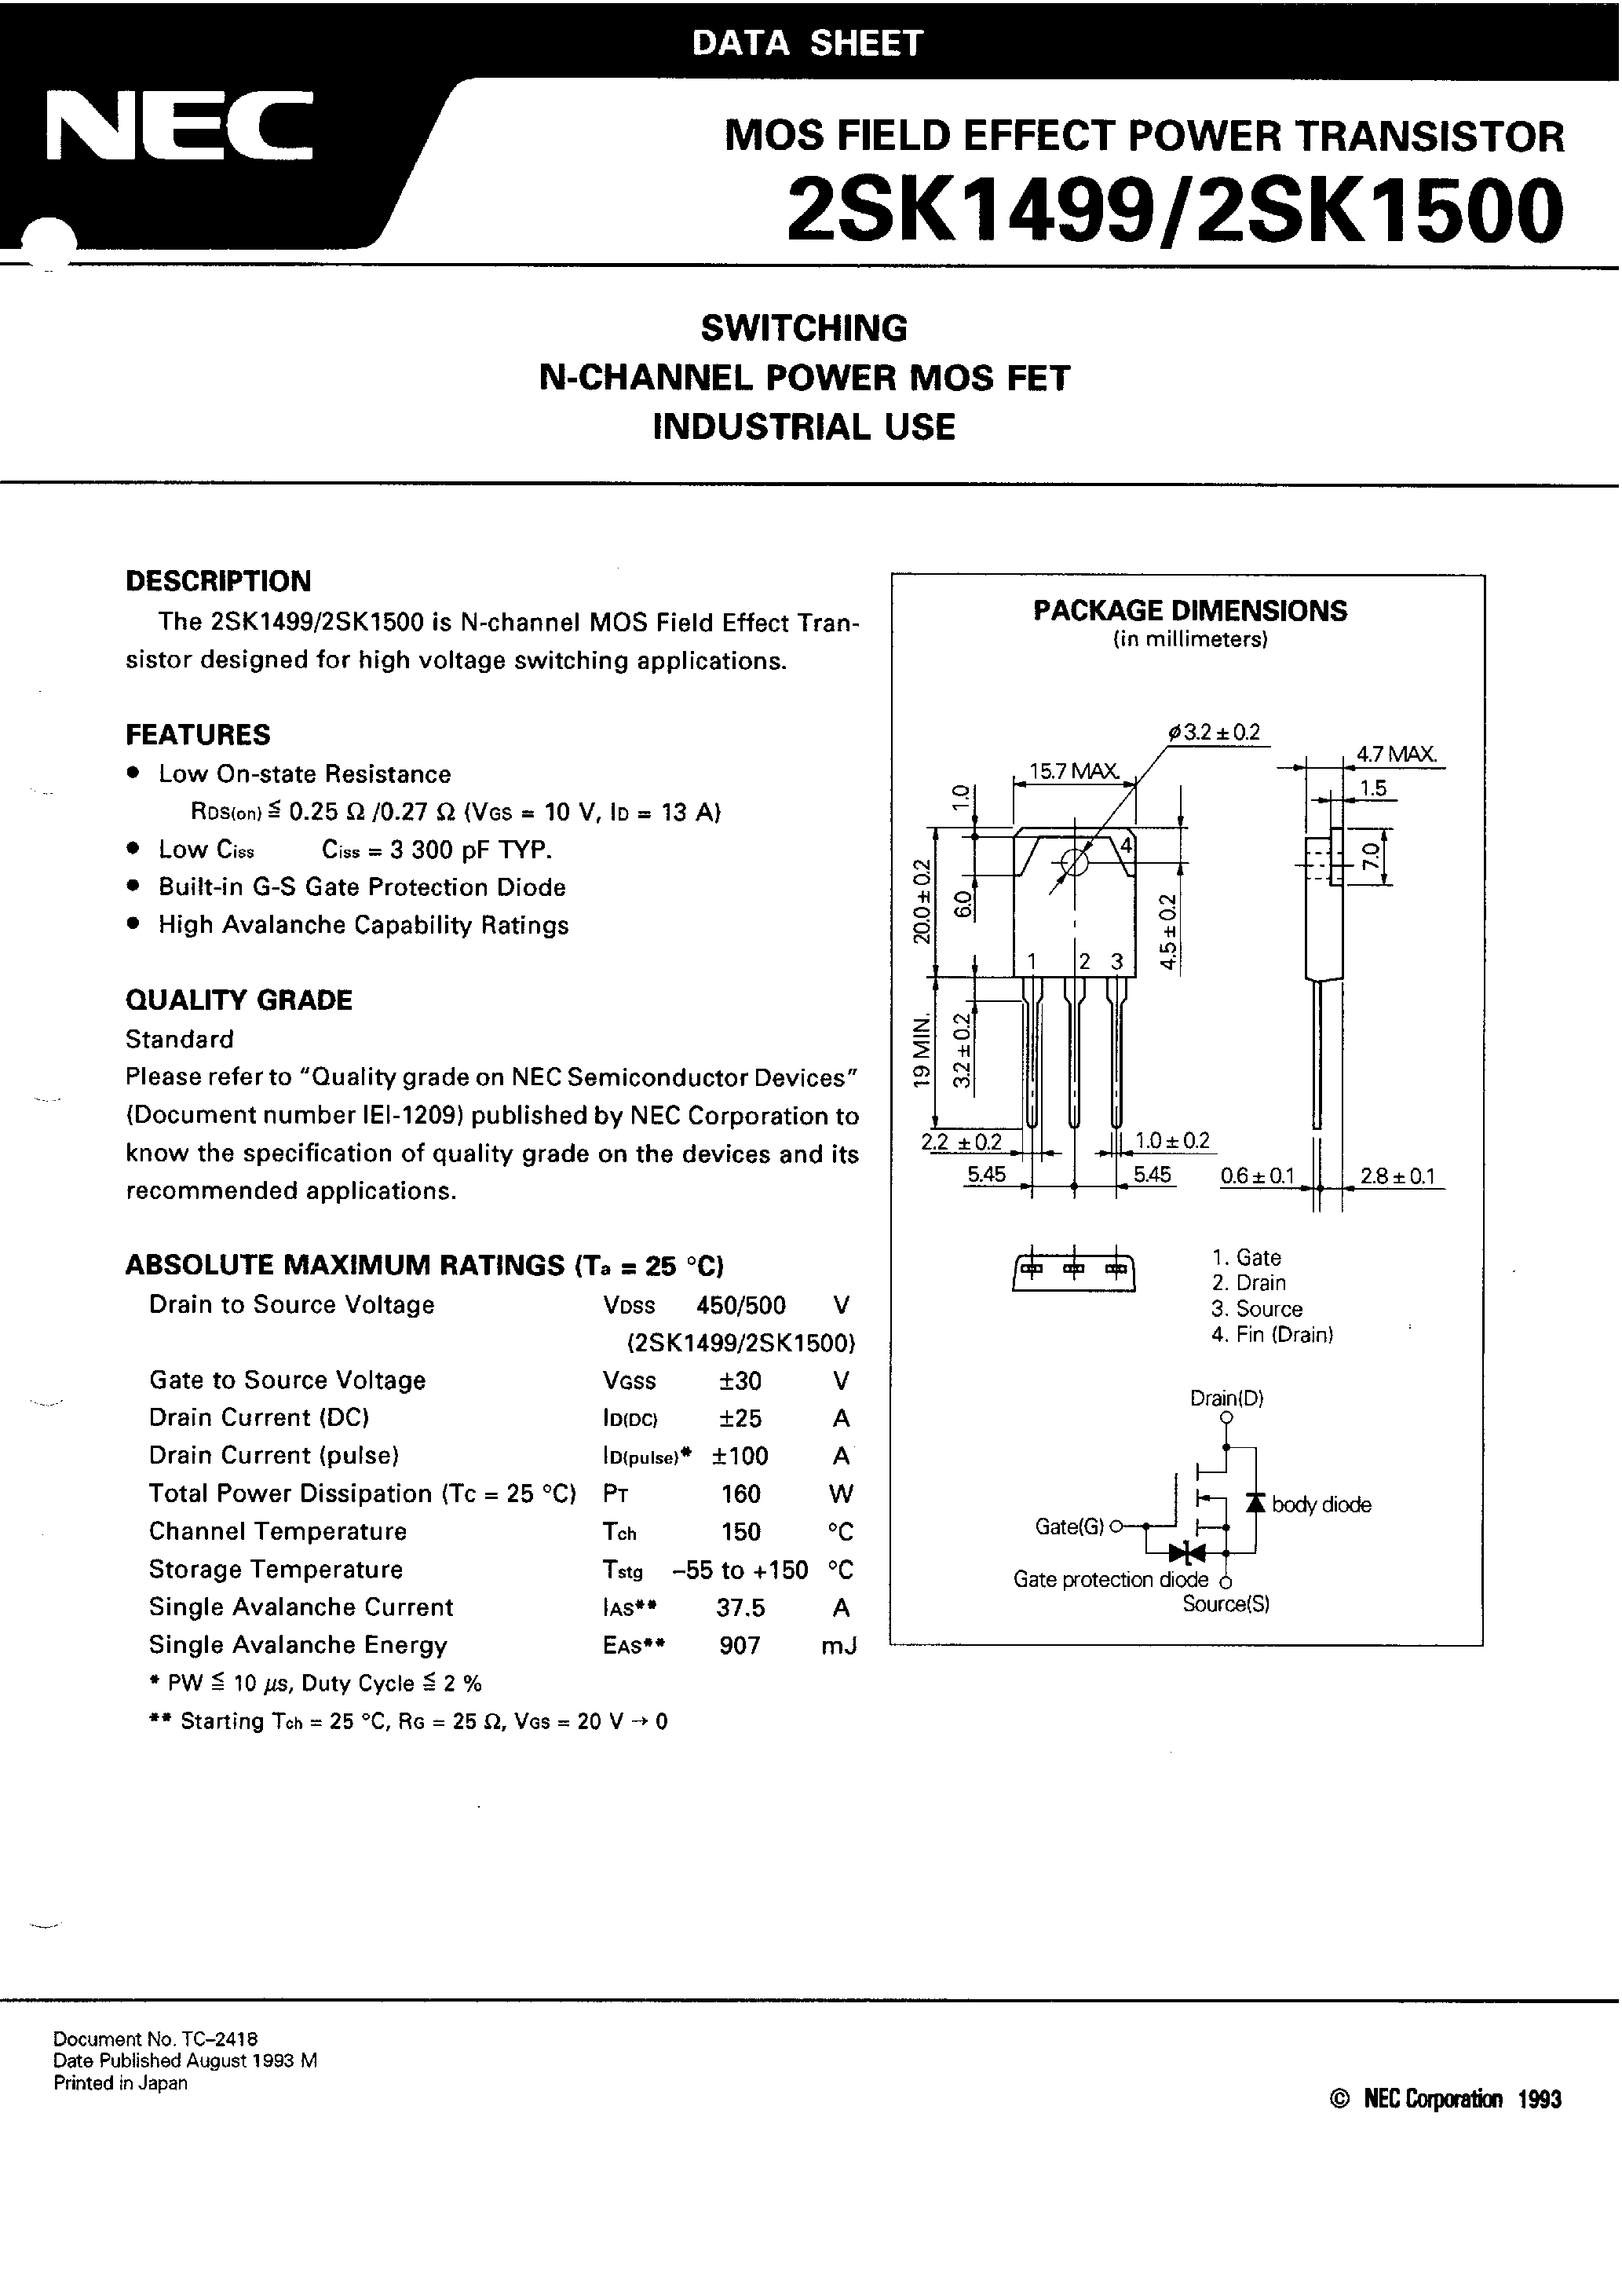 Datasheet 2SK1499 - (2SK1499 / 2SK1500) Switching N-Channel Power MOS FET page 2